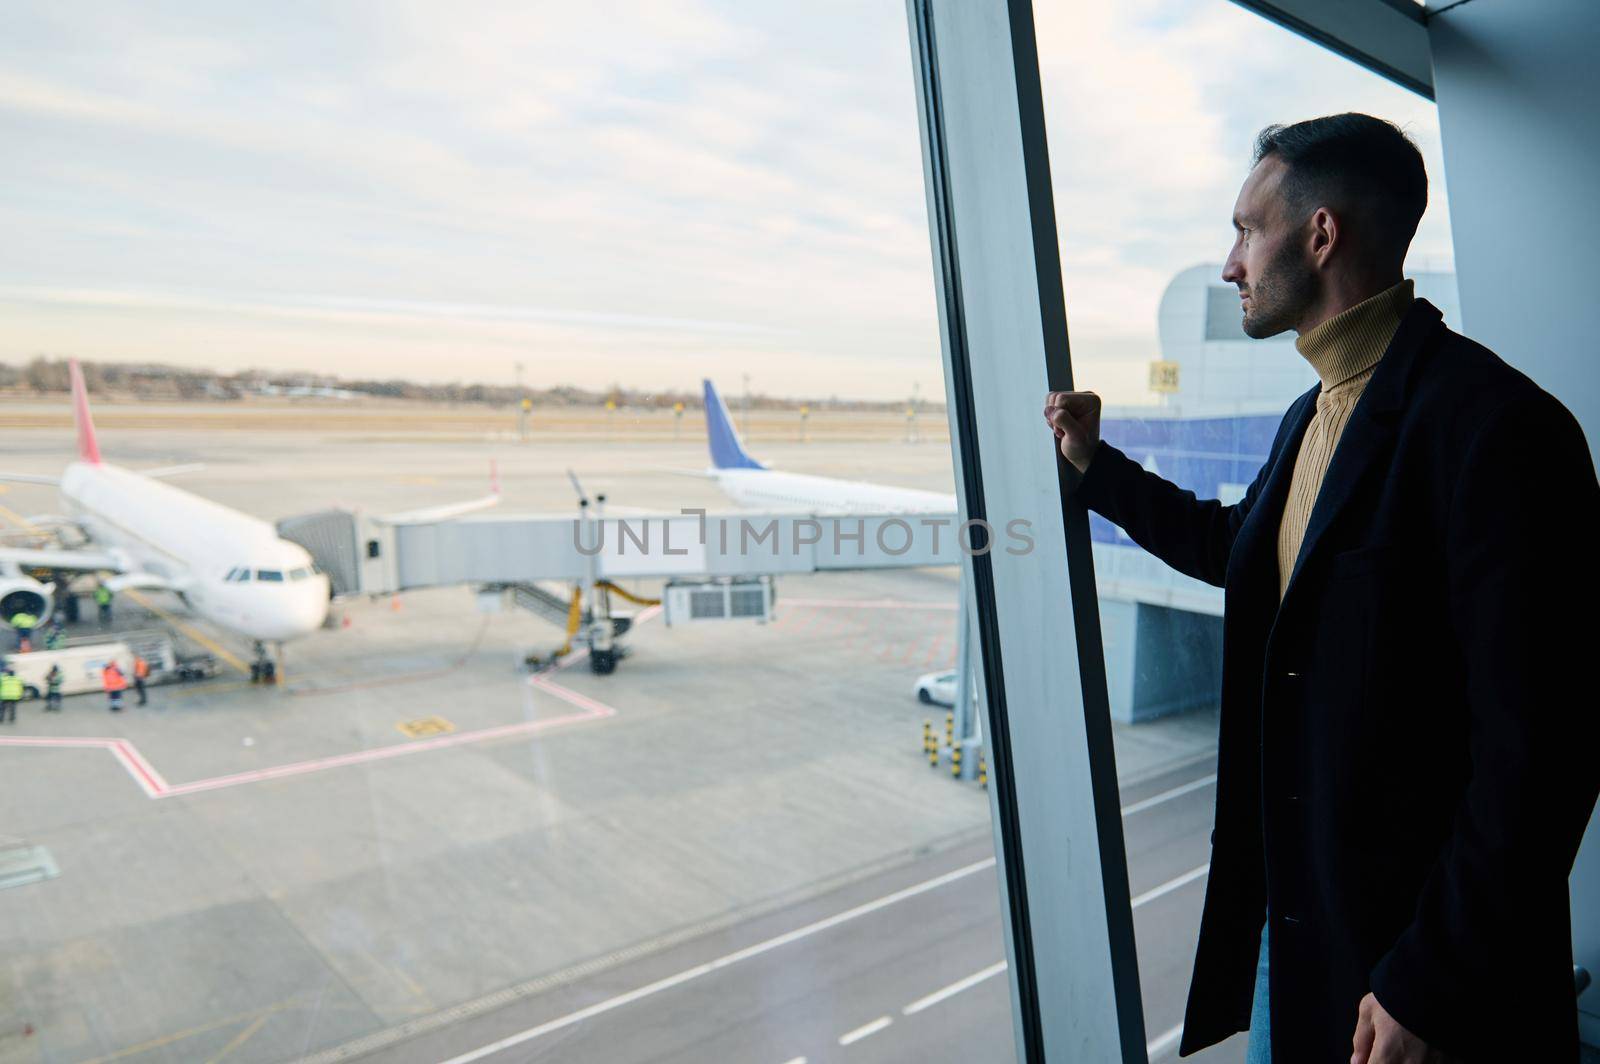 Confident handsome businessman on a business trip stands at the panoramic window in the waiting room of the international airport, admiring the planes on the runways while waiting to board the flight